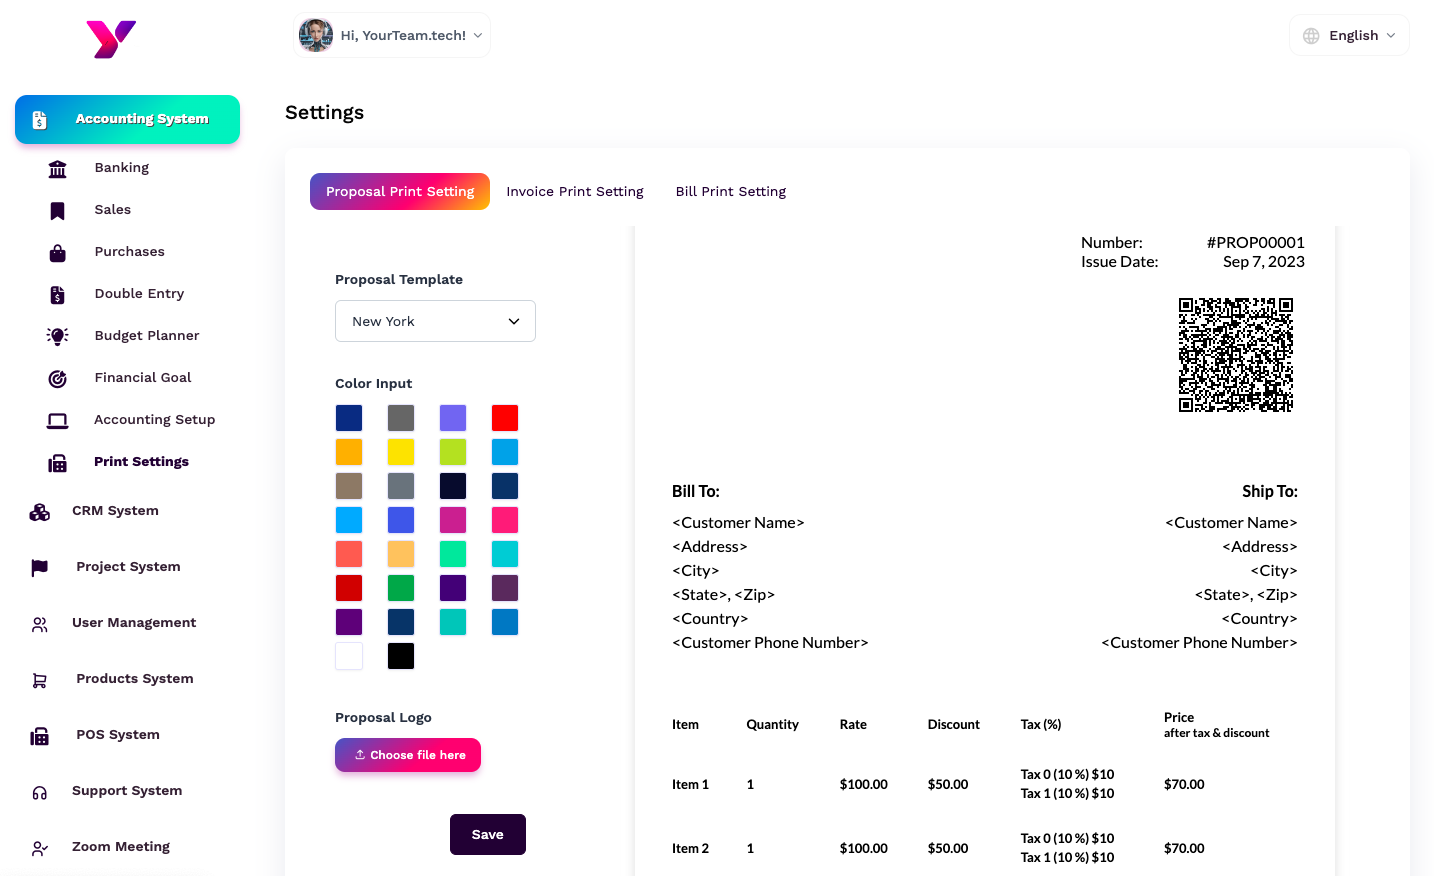 The interface of the tool where you can generate and print invoice